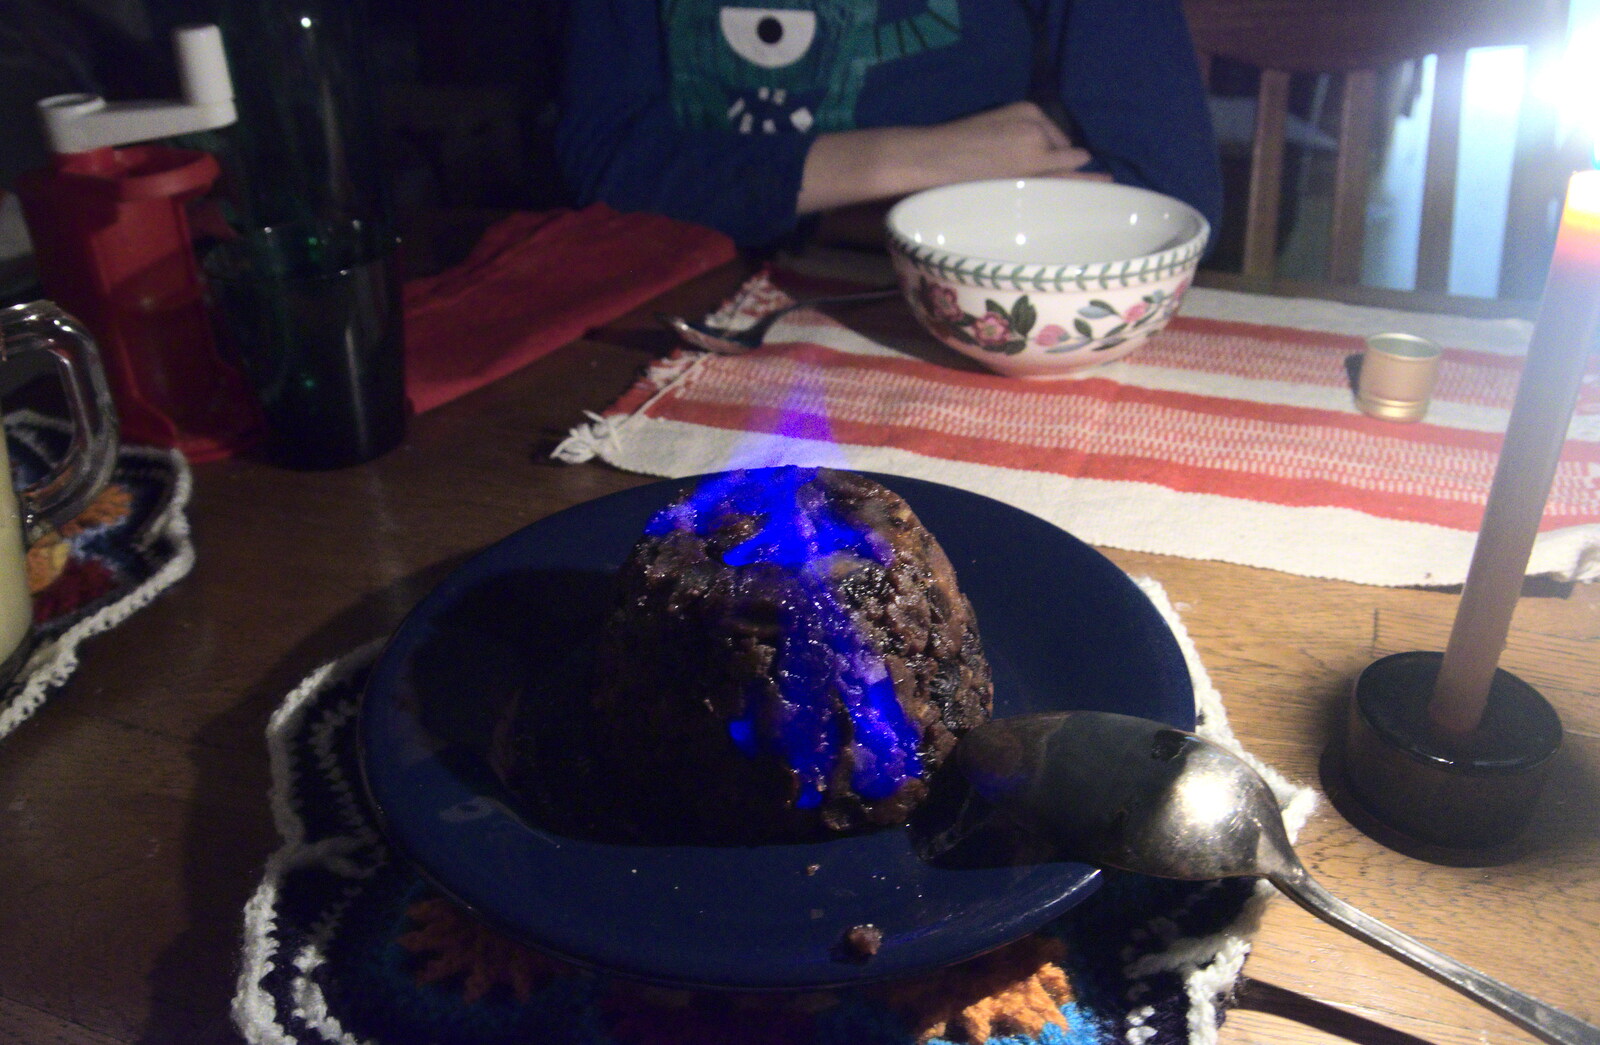 Back home, we eat some very late Christmas pudding from The Star Wing Winter Beer Fest, Redgrave, Suffolk - 31st January 2020